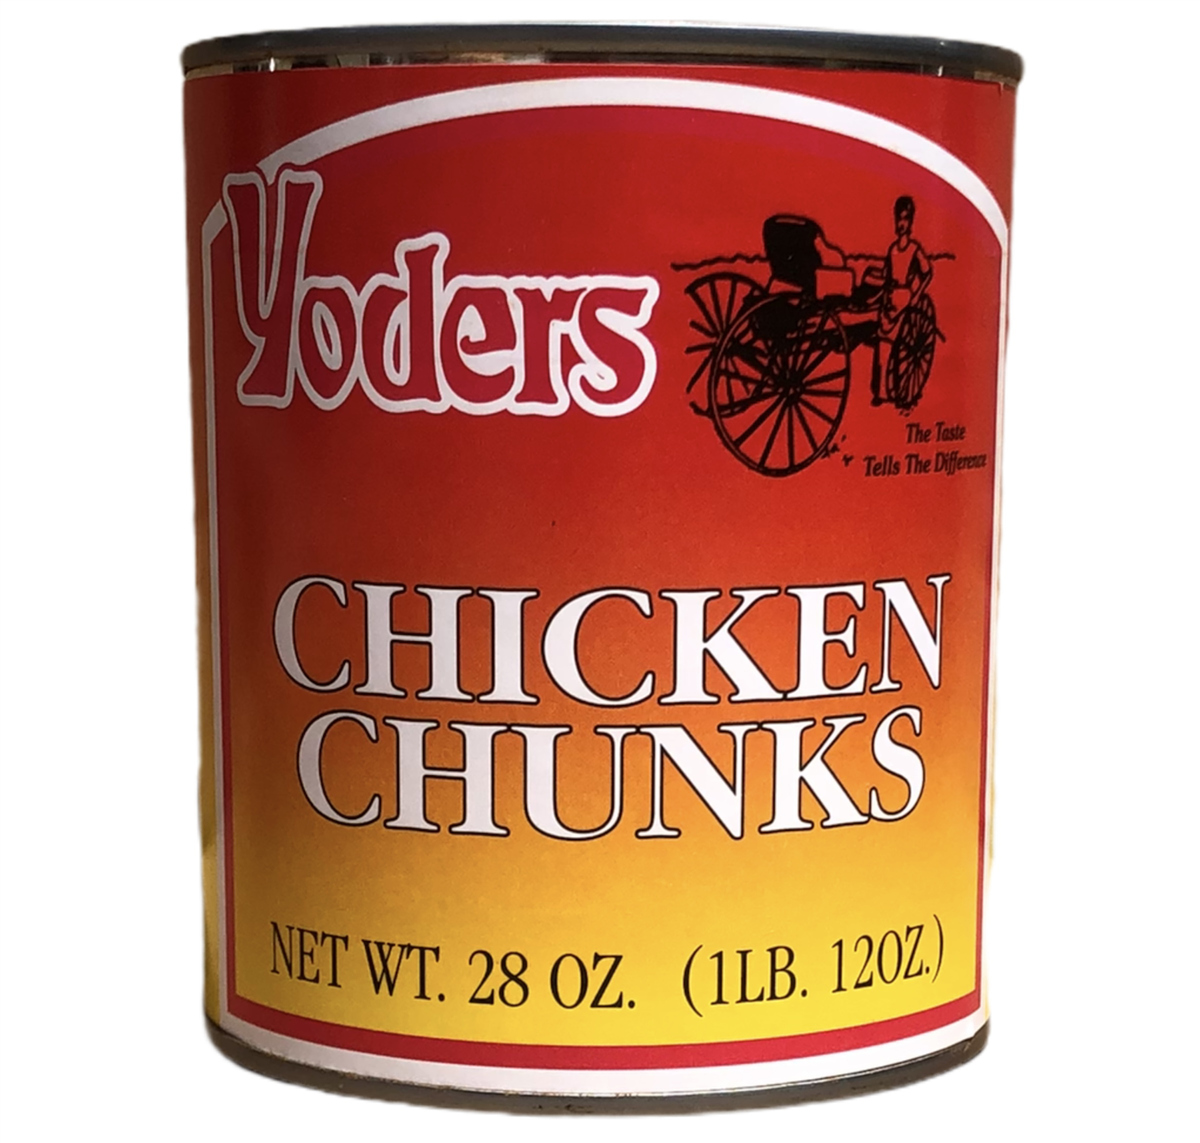 Case (12 Cans) of Yoder's fresh REAL Canned Chicken Chunks